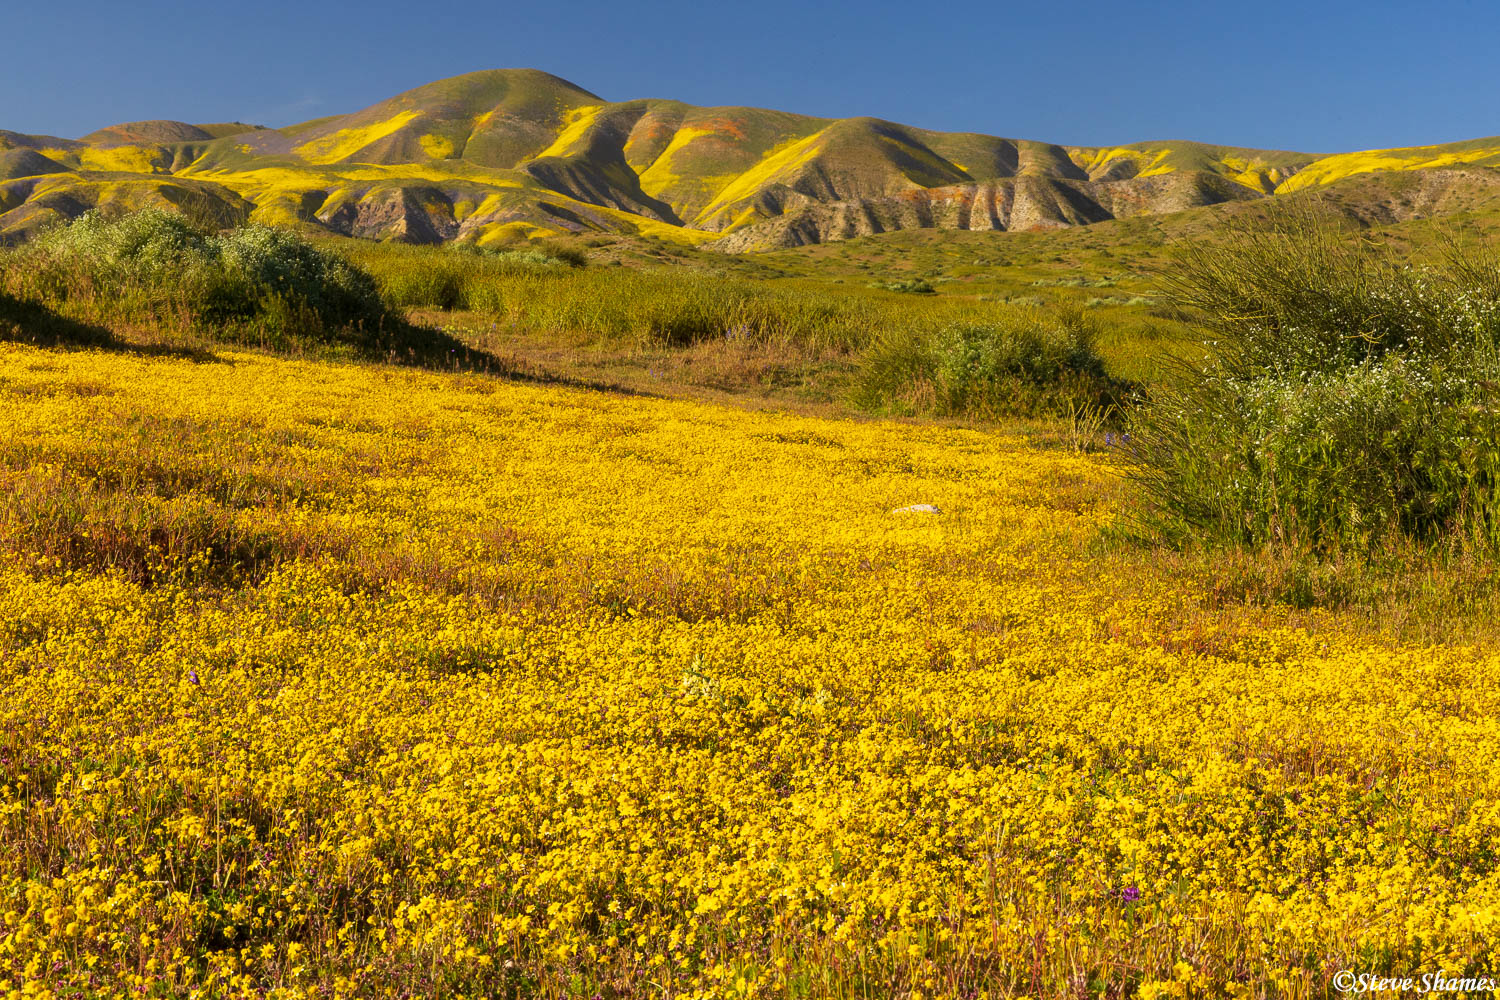 A scene at the Carrizo Plains during the "super bloom"! I really like the colorful hills.